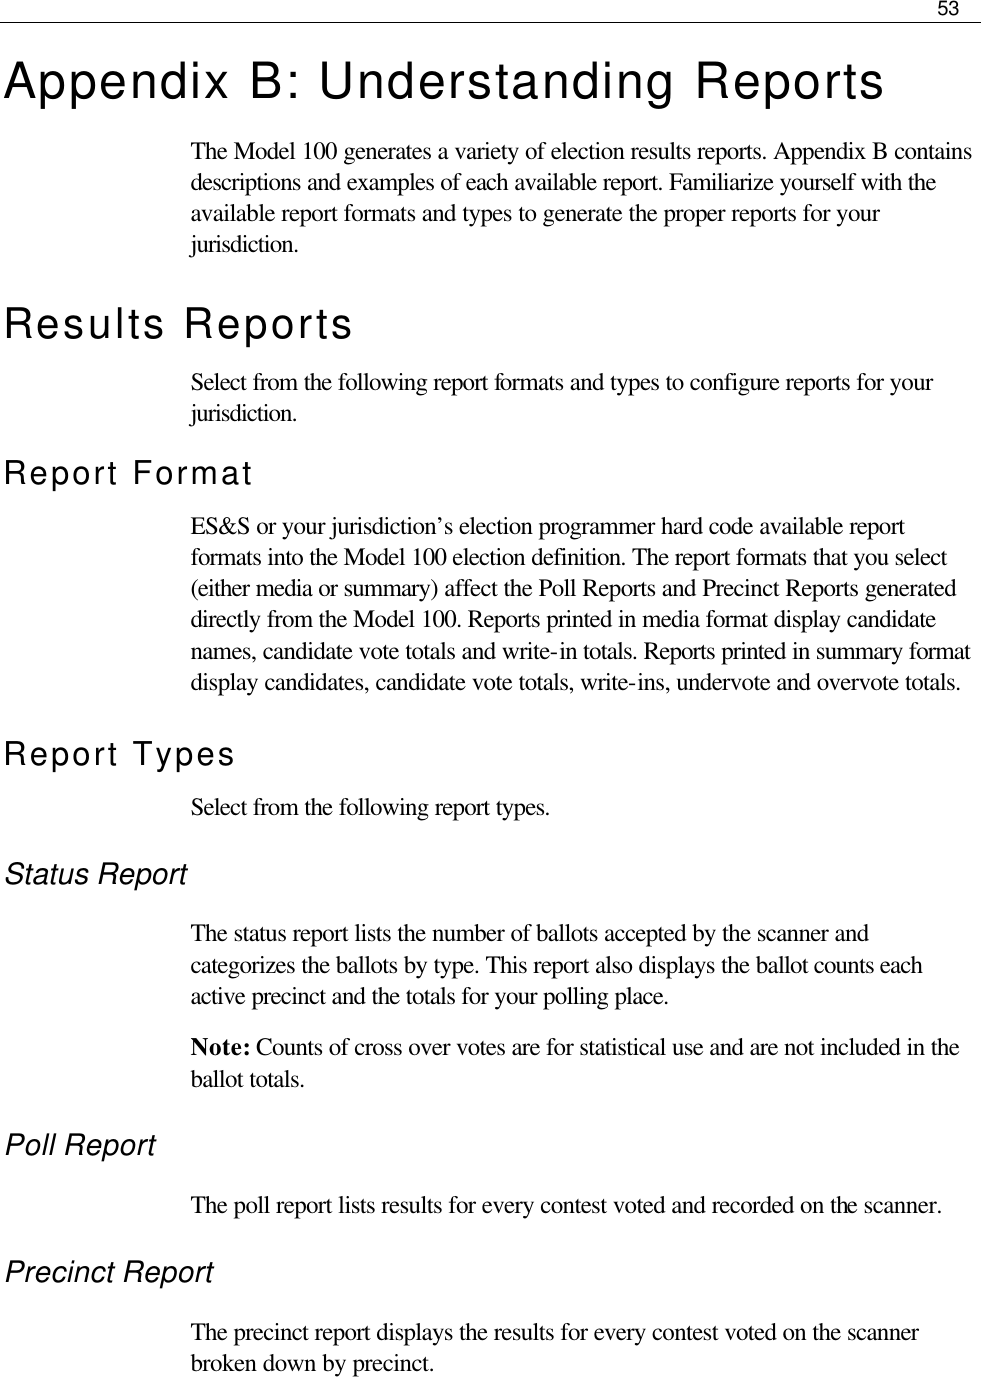     53  Appendix B: Understanding Reports The Model 100 generates a variety of election results reports. Appendix B contains descriptions and examples of each available report. Familiarize yourself with the available report formats and types to generate the proper reports for your jurisdiction.  Results Reports Select from the following report formats and types to configure reports for your jurisdiction. Report Format ES&amp;S or your jurisdiction’s election programmer hard code available report formats into the Model 100 election definition. The report formats that you select (either media or summary) affect the Poll Reports and Precinct Reports generated directly from the Model 100. Reports printed in media format display candidate names, candidate vote totals and write-in totals. Reports printed in summary format display candidates, candidate vote totals, write-ins, undervote and overvote totals. Report Types Select from the following report types. Status Report The status report lists the number of ballots accepted by the scanner and categorizes the ballots by type. This report also displays the ballot counts each active precinct and the totals for your polling place. Note: Counts of cross over votes are for statistical use and are not included in the ballot totals. Poll Report The poll report lists results for every contest voted and recorded on the scanner. Precinct Report The precinct report displays the results for every contest voted on the scanner broken down by precinct. 